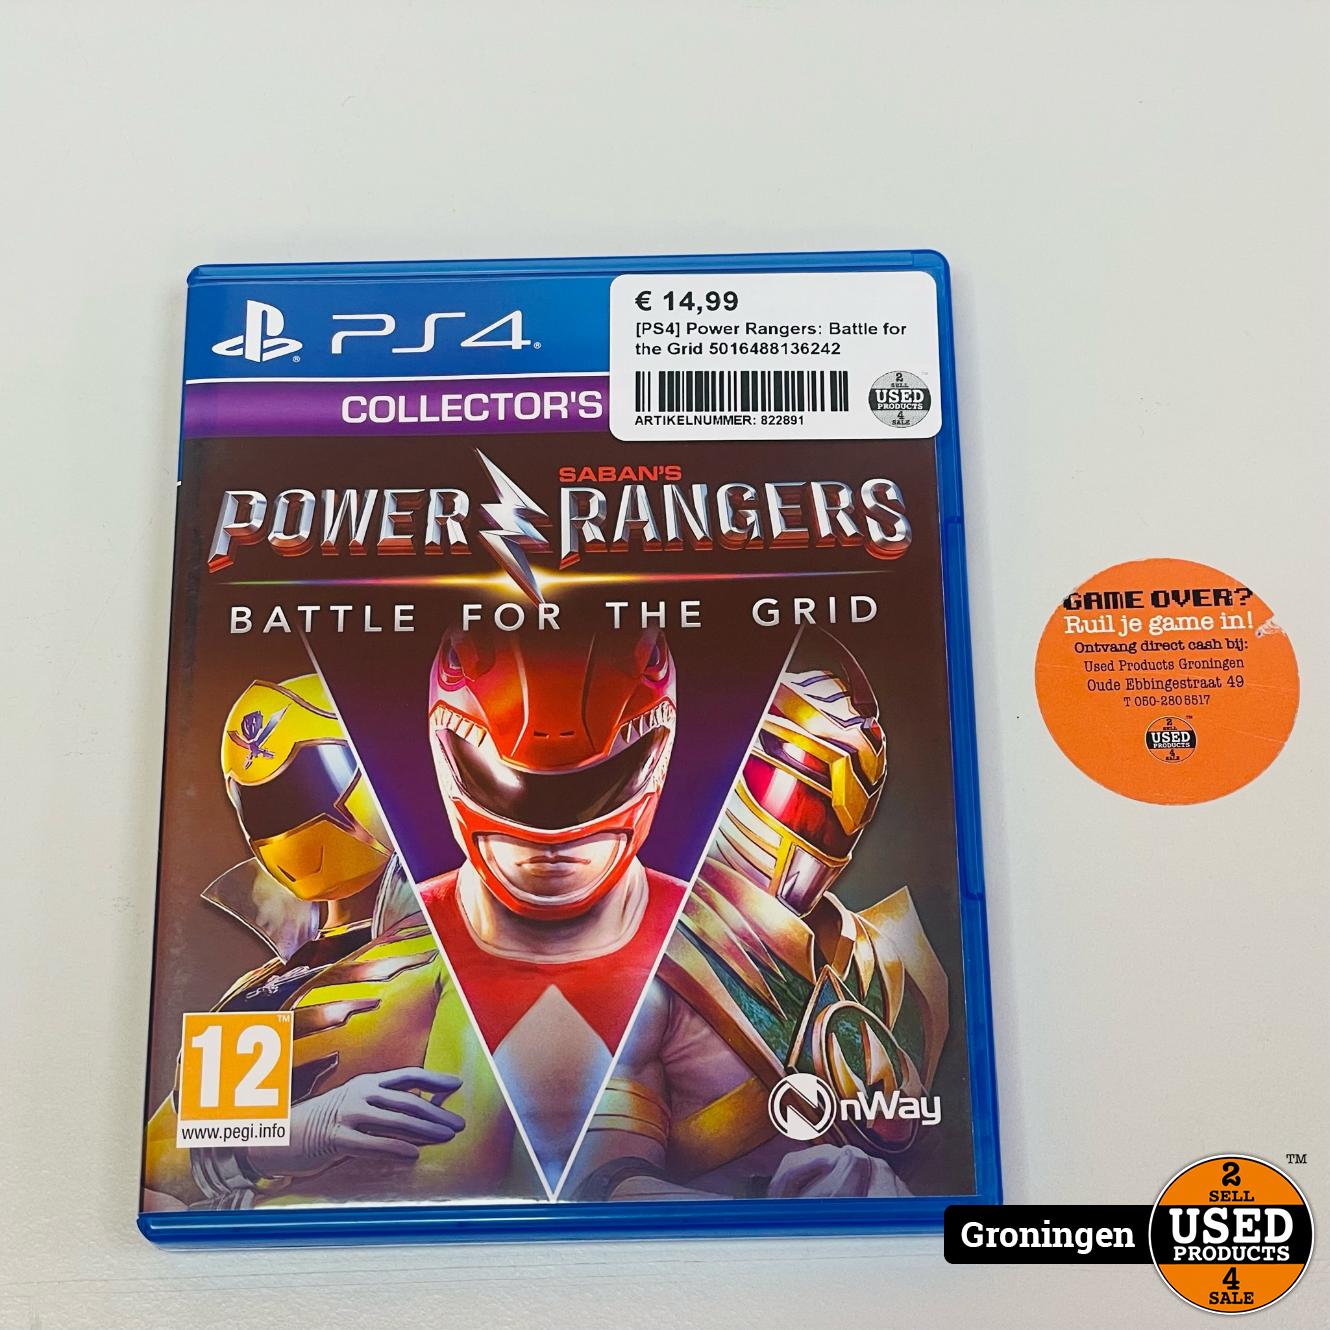 duft komedie gør ikke PS4] Power Rangers: Battle for the Grid - Used Products Groningen